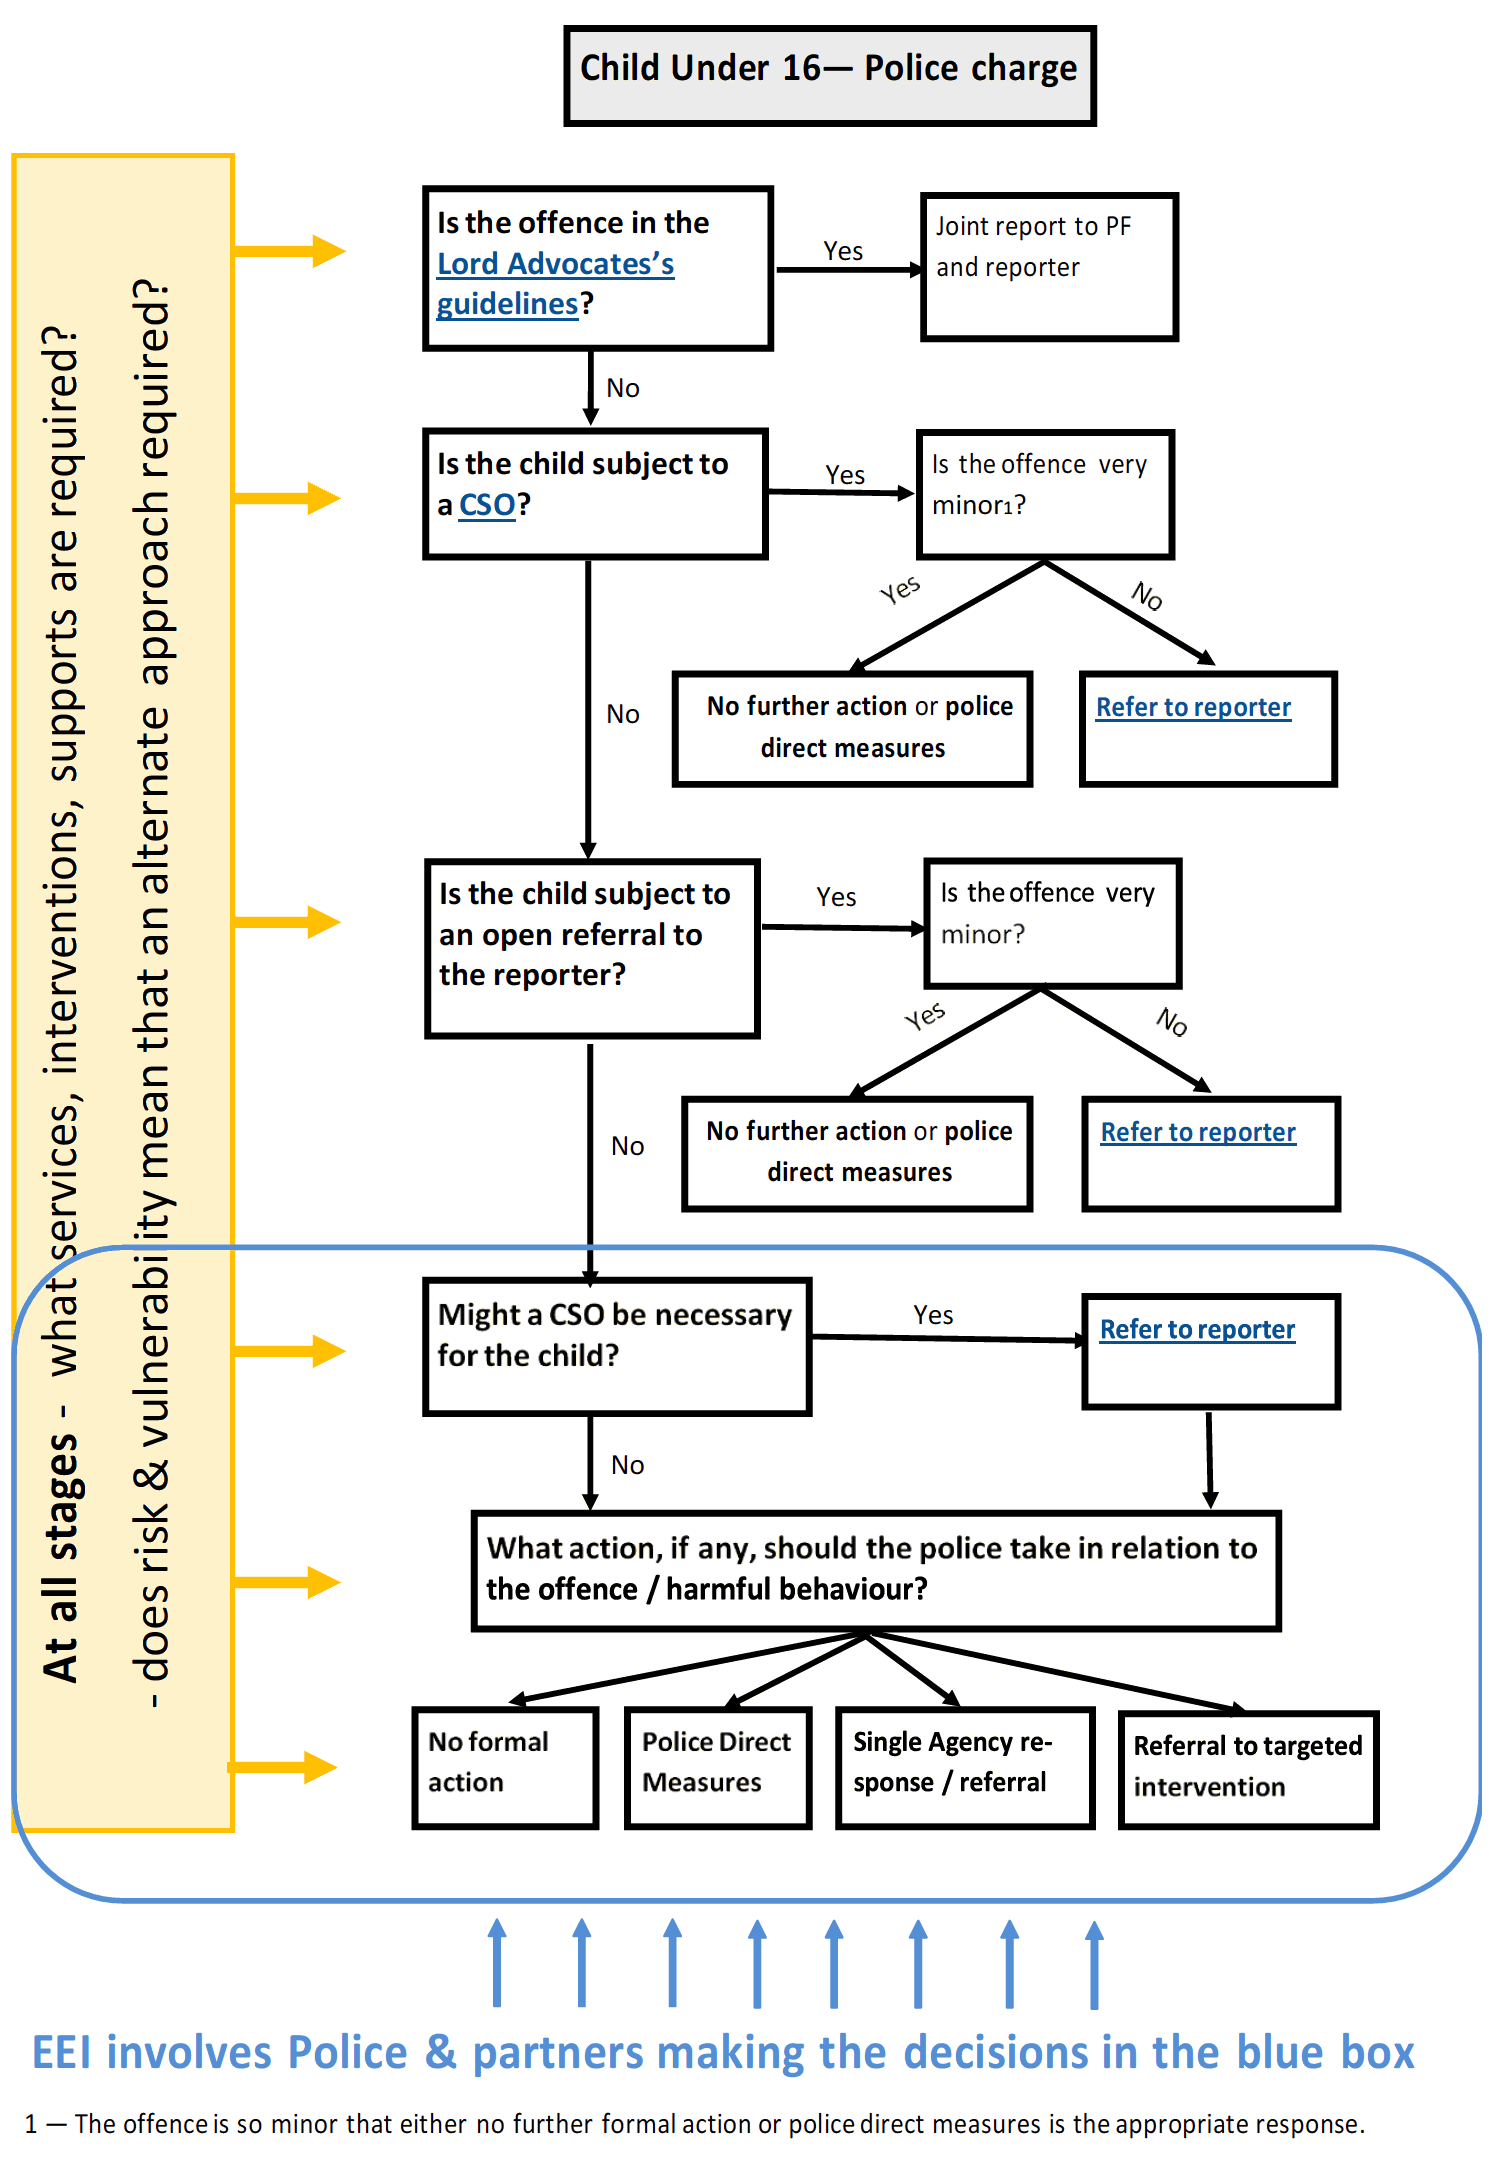 Graphic 2 is a flowchart outlining the process to be followed when a child under the age of 16 is facing a police charge